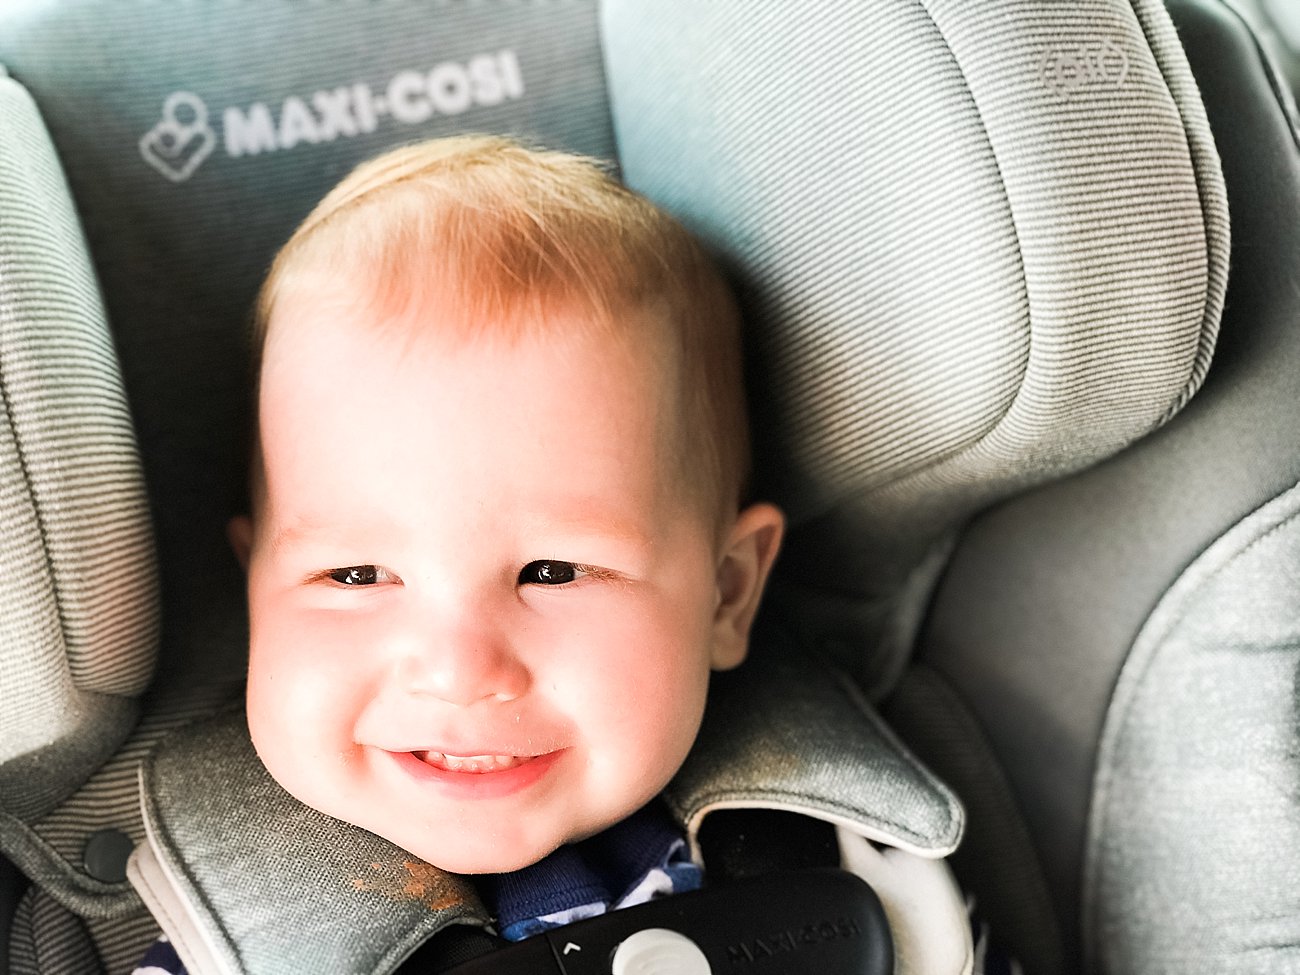 Maxi Cosi Pria ™ 85 Max Convertible Car Seat Review by NC blogger Still Being Molly